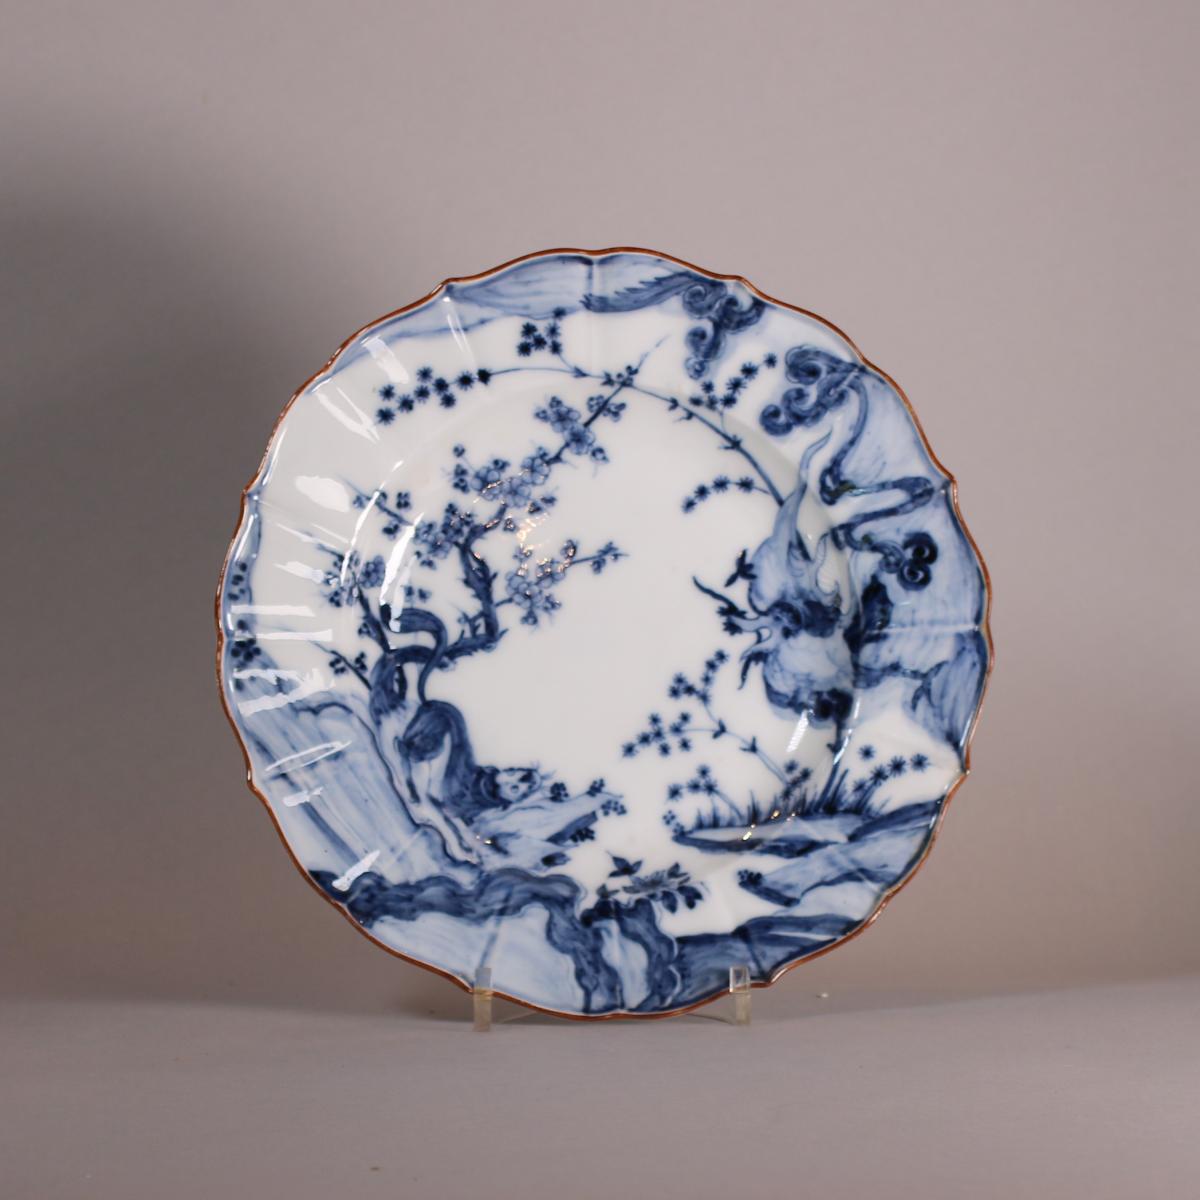 An extremely rare are Meissen dish in the kakiemon style, c.1740